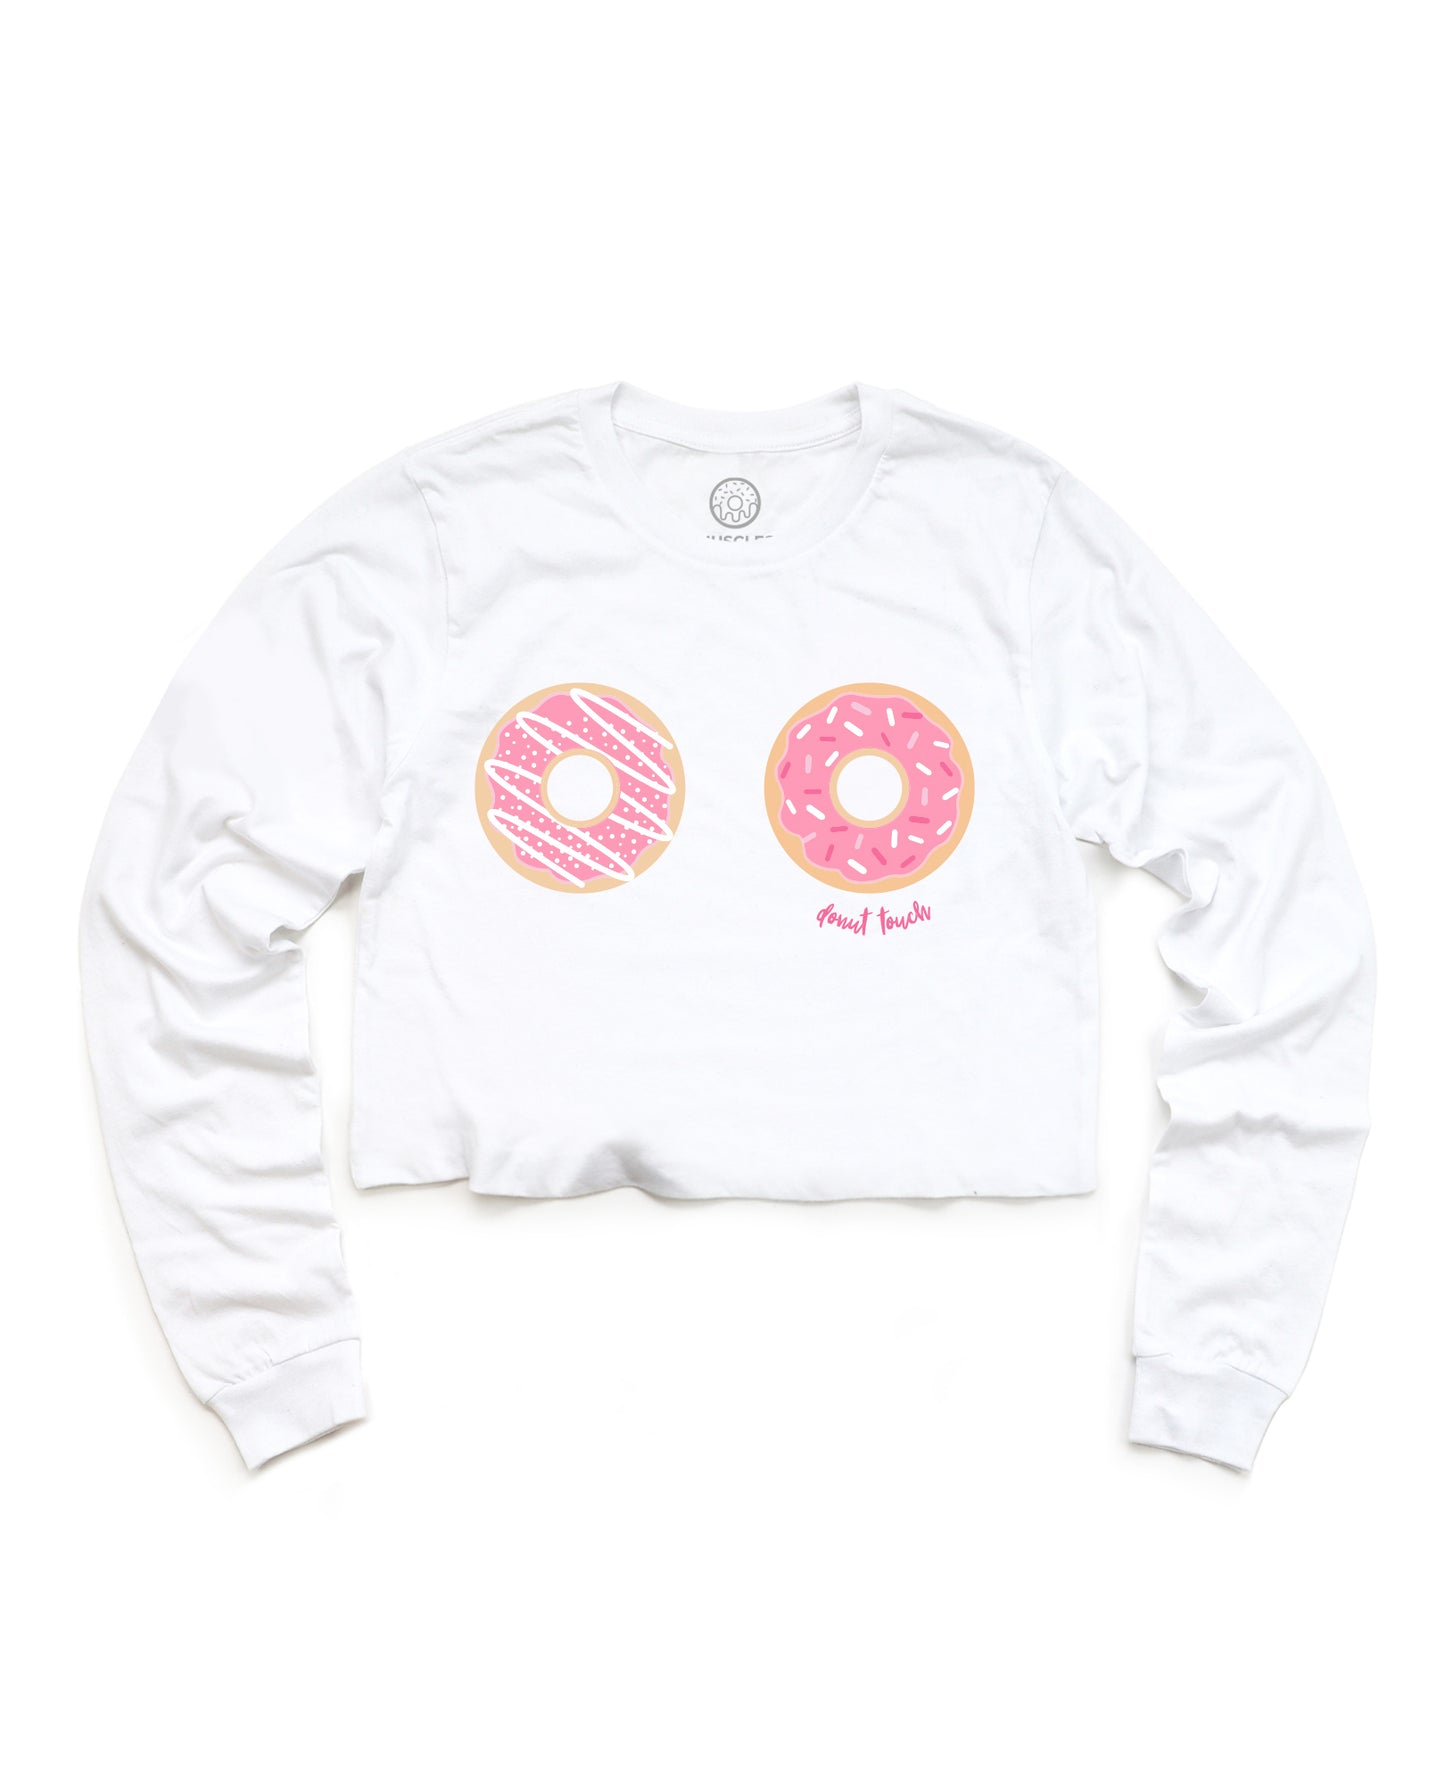 DONUT TOUCH! White Cropped Long Sleeve